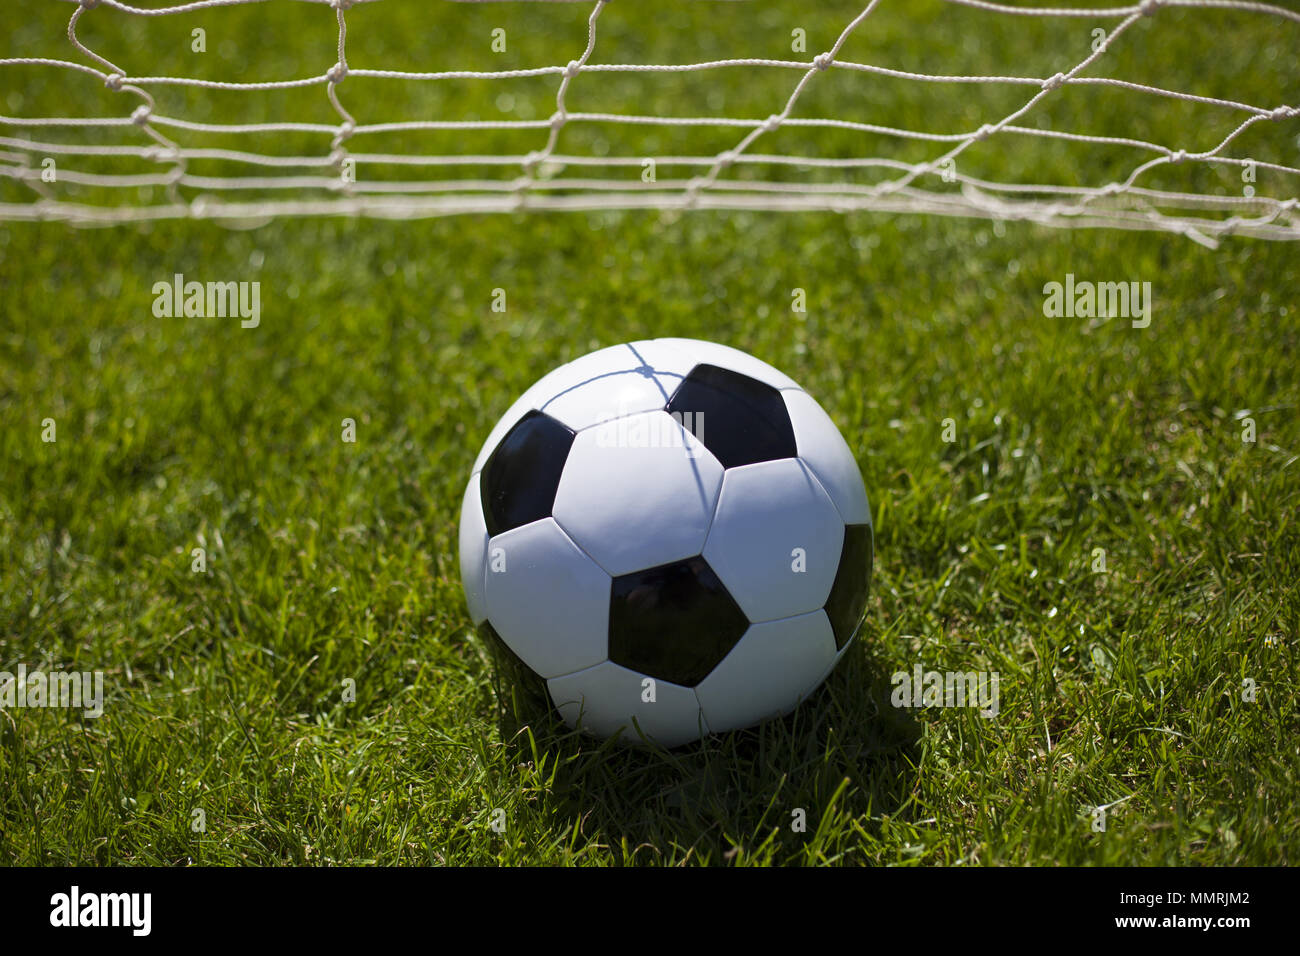 A black and white football in the middle of the net Stock Photo